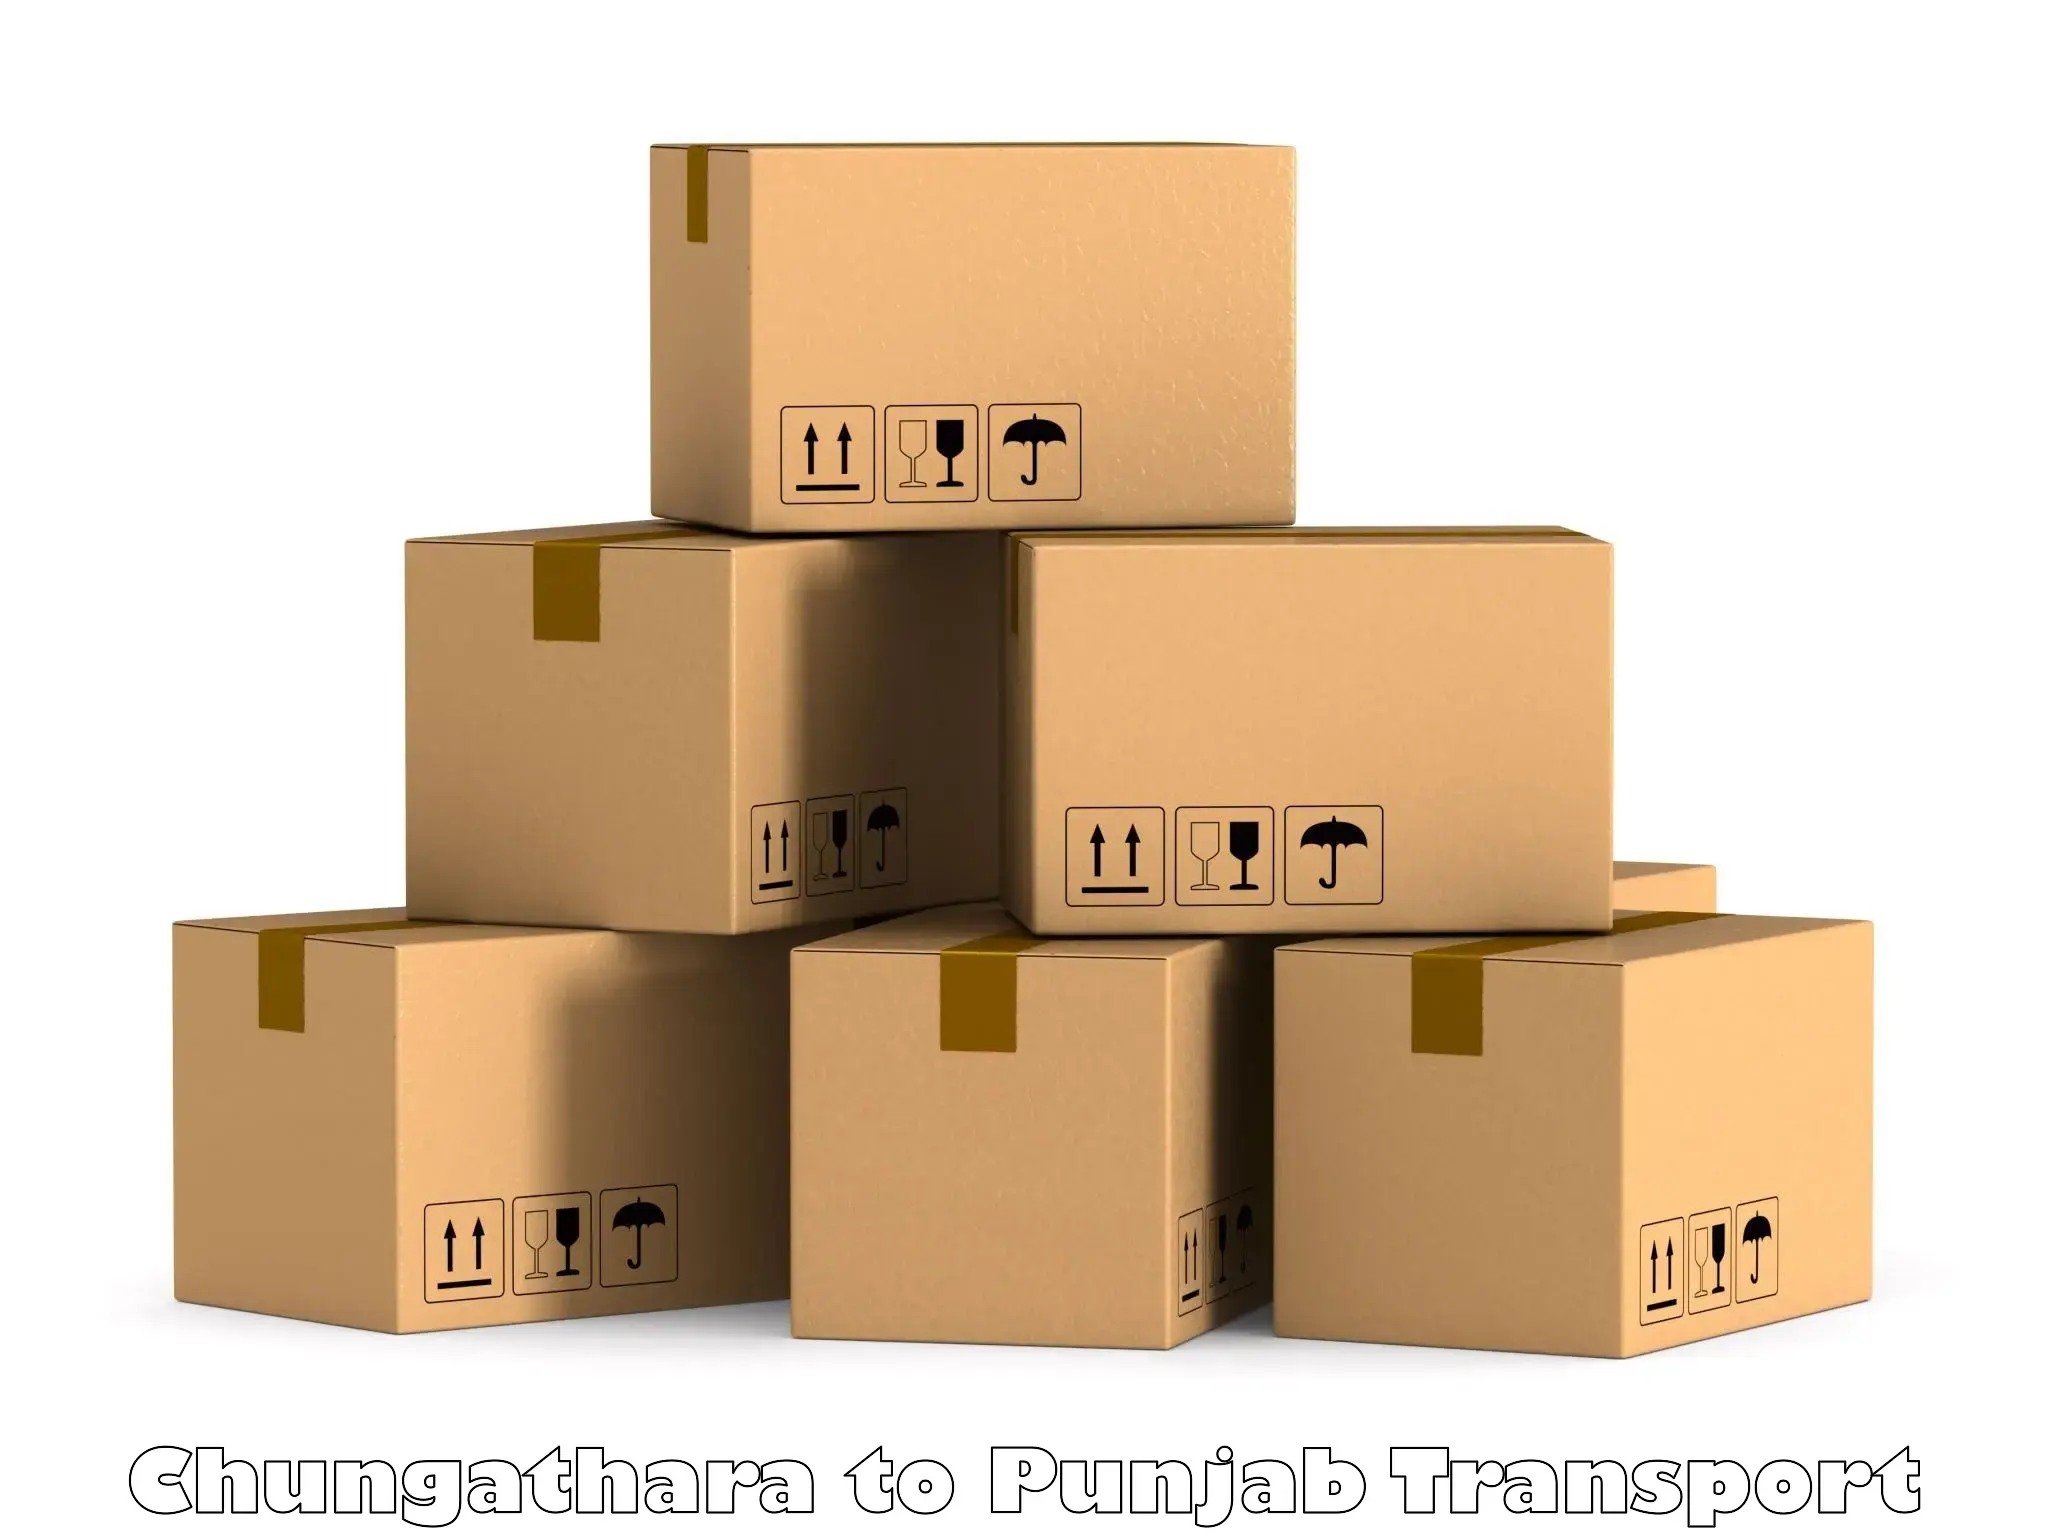 Truck transport companies in India Chungathara to Mohali